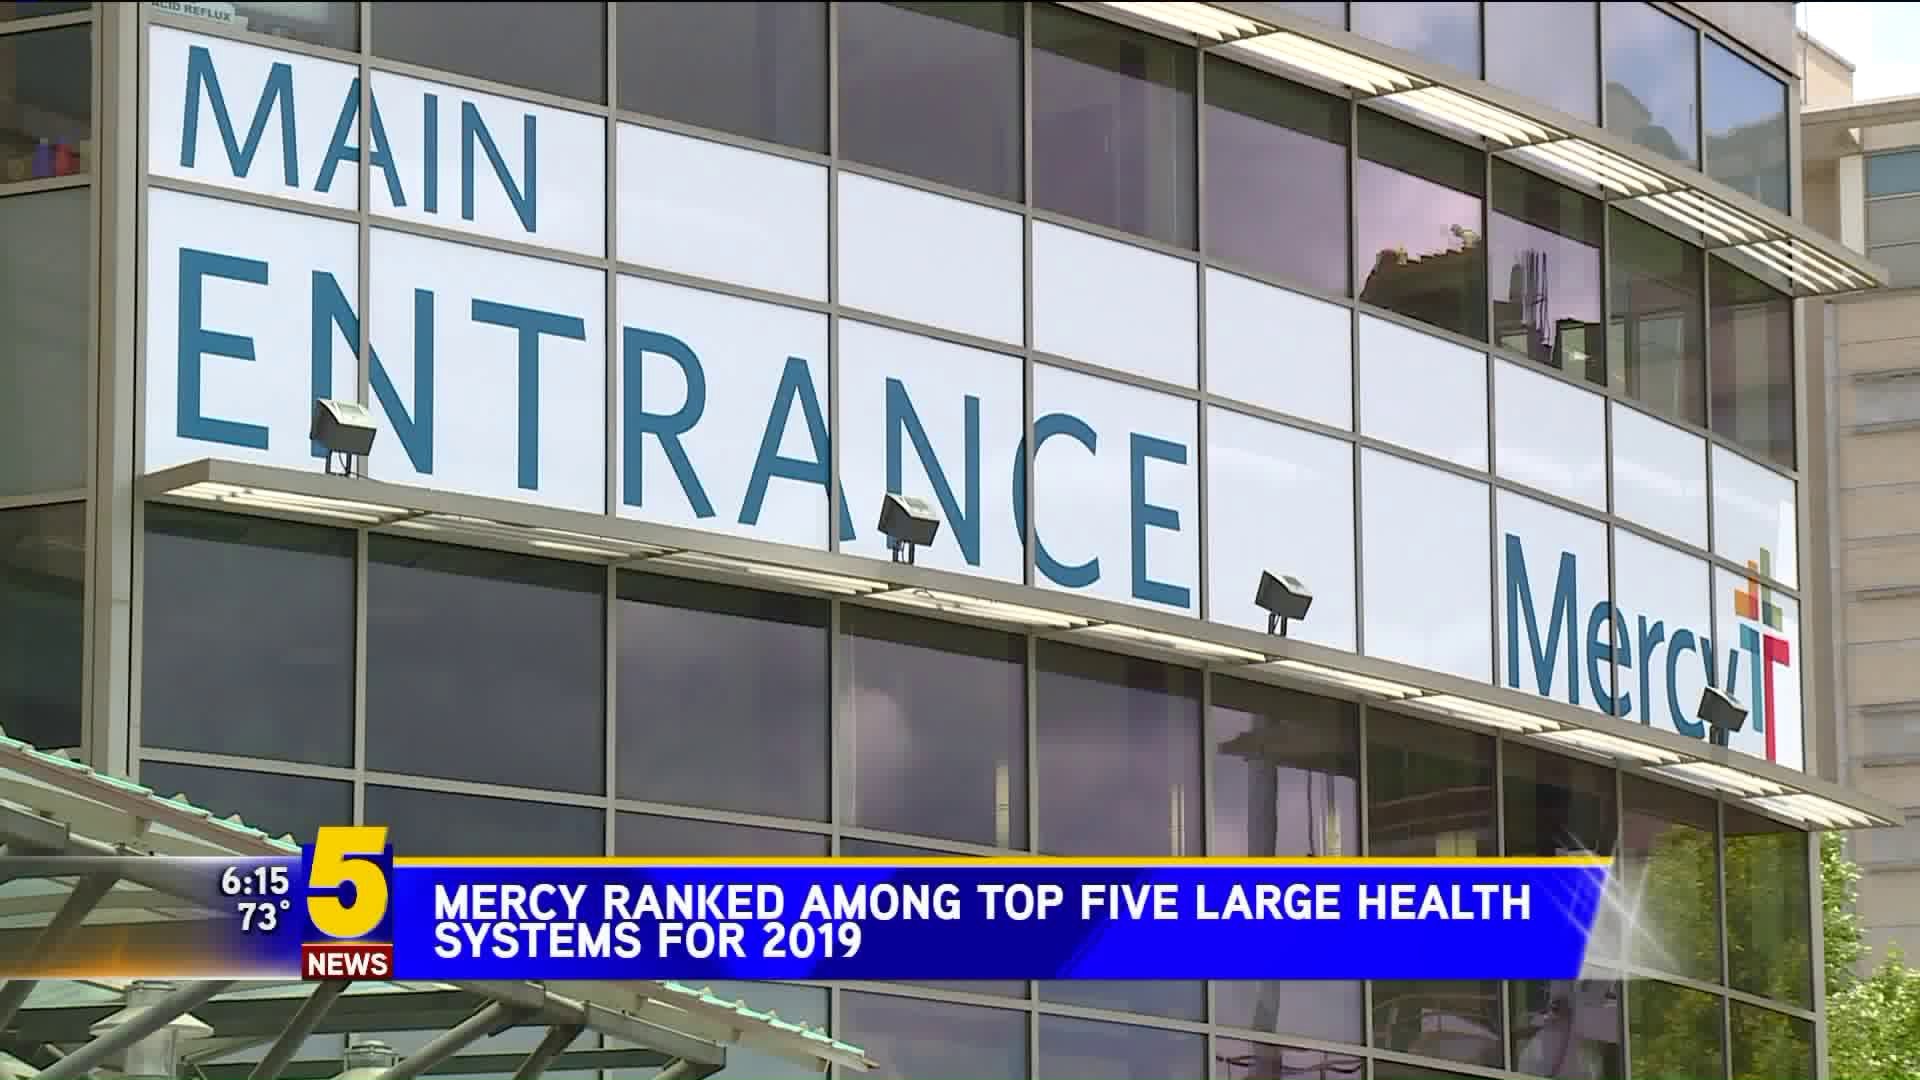 Mercy Ranked Among Top Five Large Health Systems for 2019